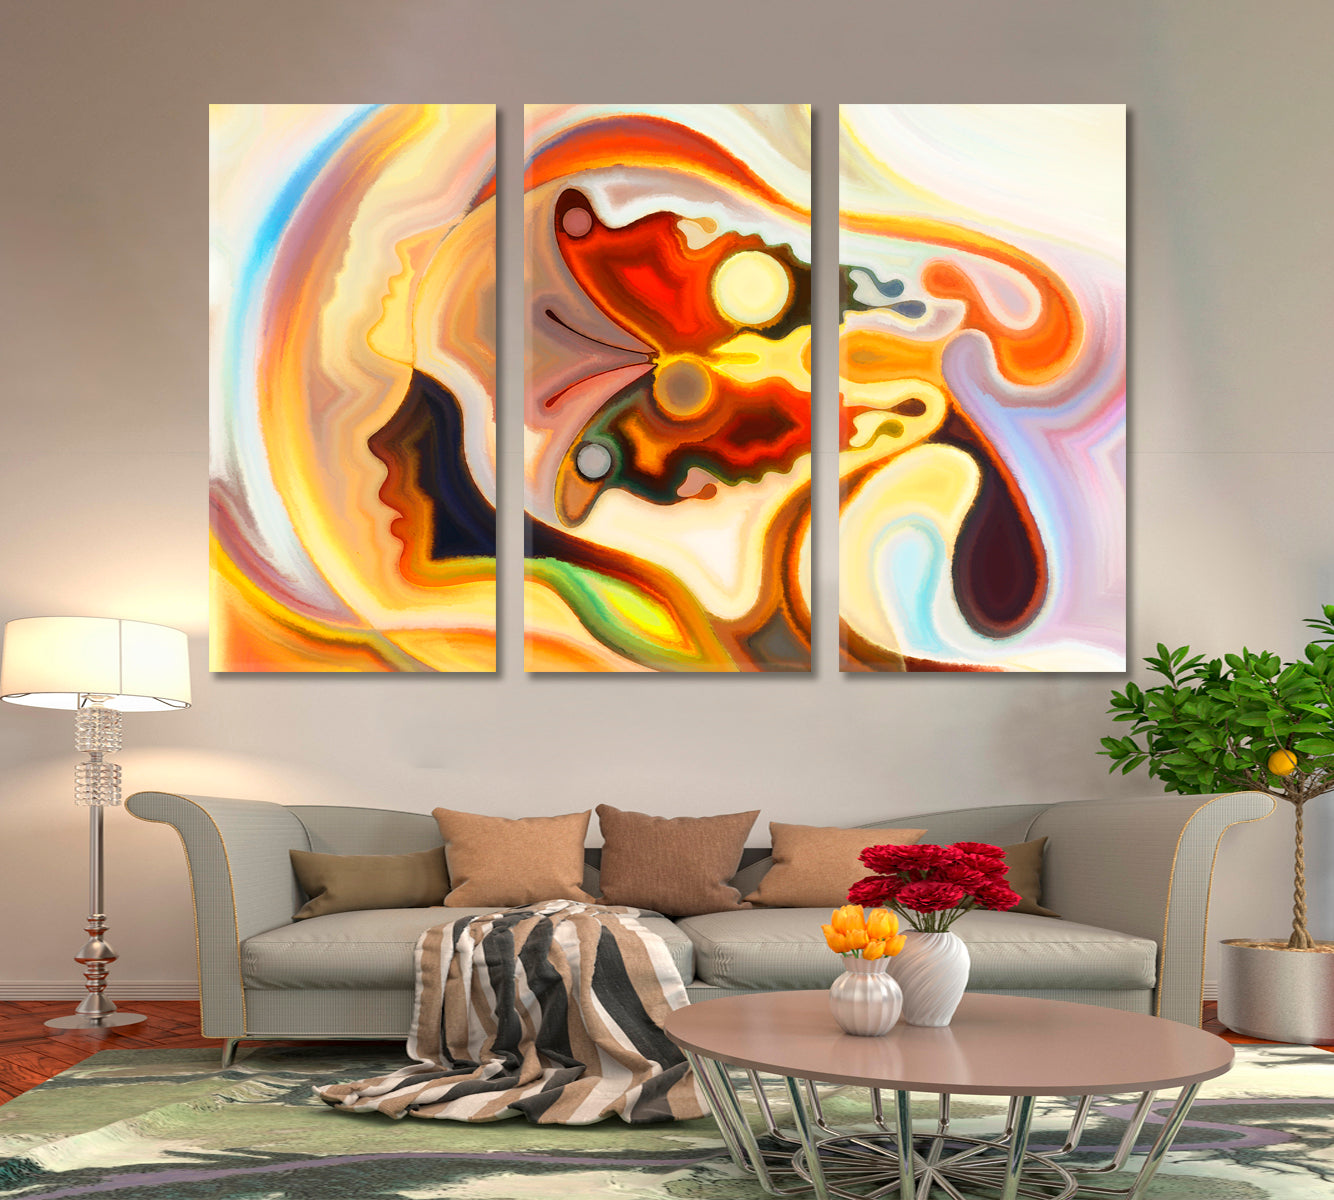 Ego and Nature Abstract Allegory Contemporary Art Artesty 3 panels 36" x 24" 